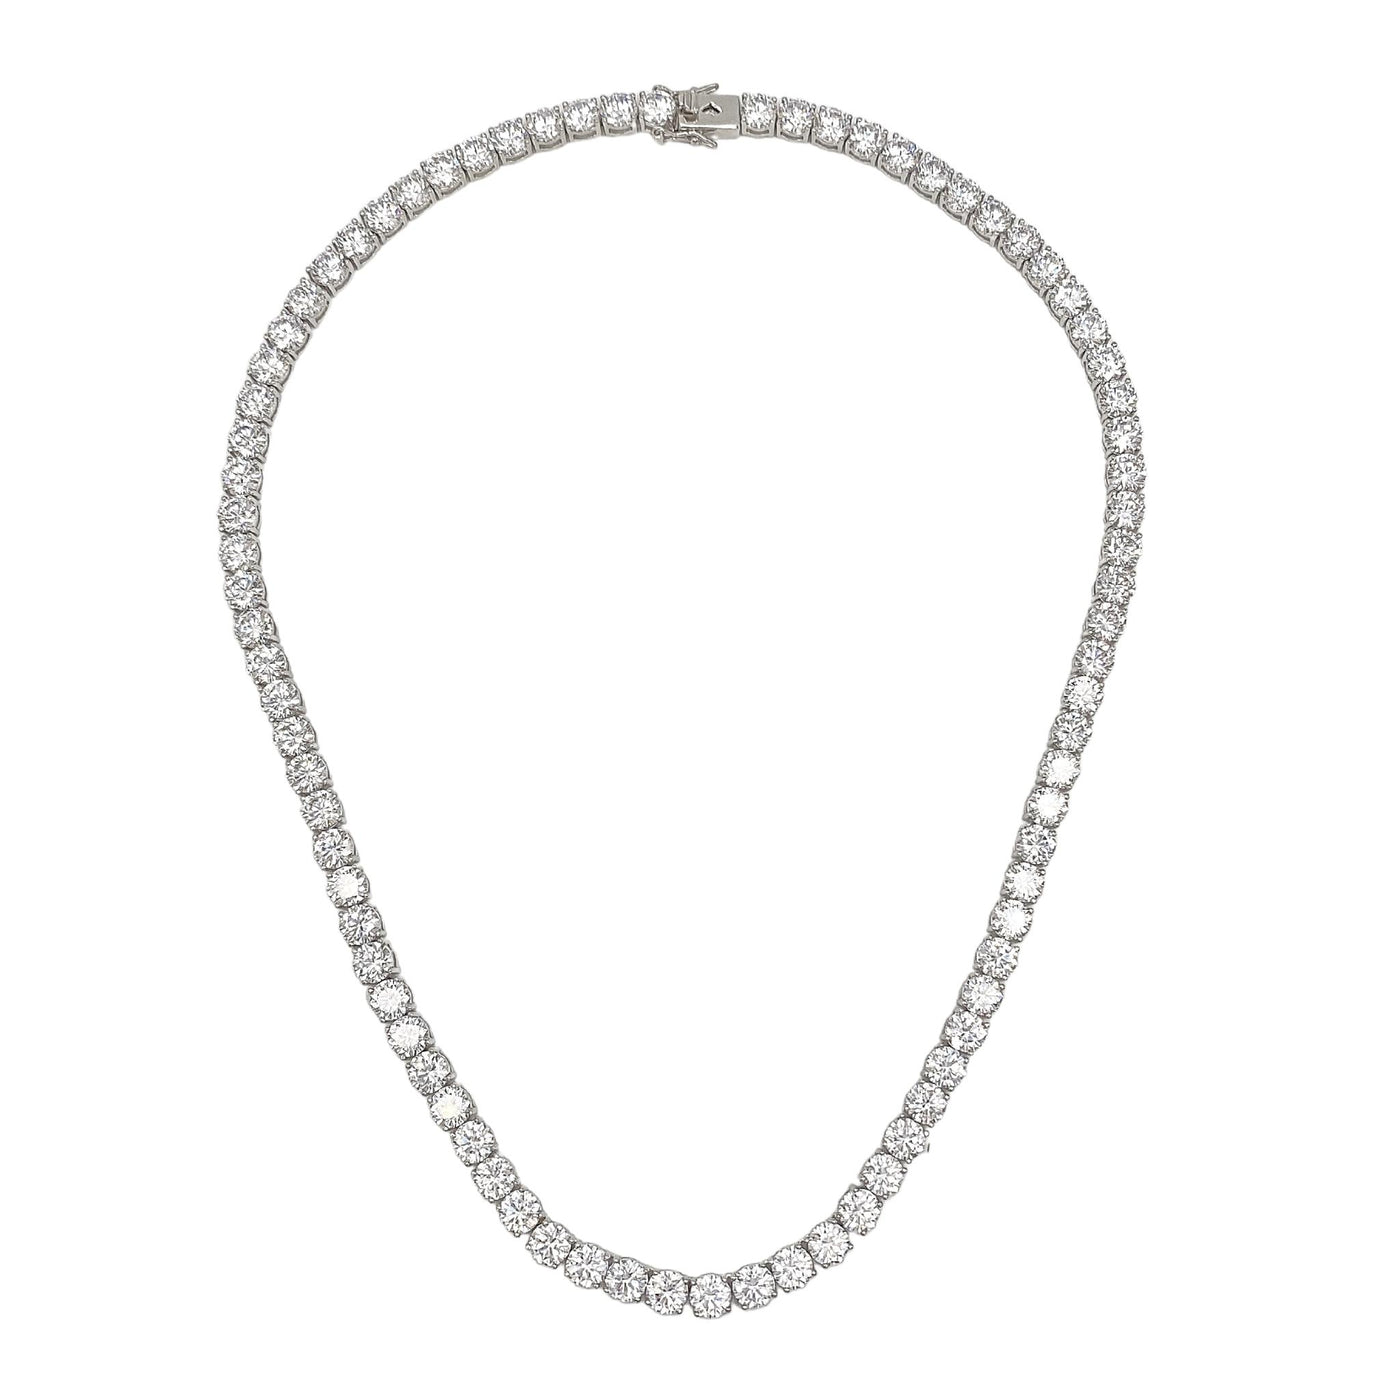 Silver casting tennis necklace with round white stones - 6 mm